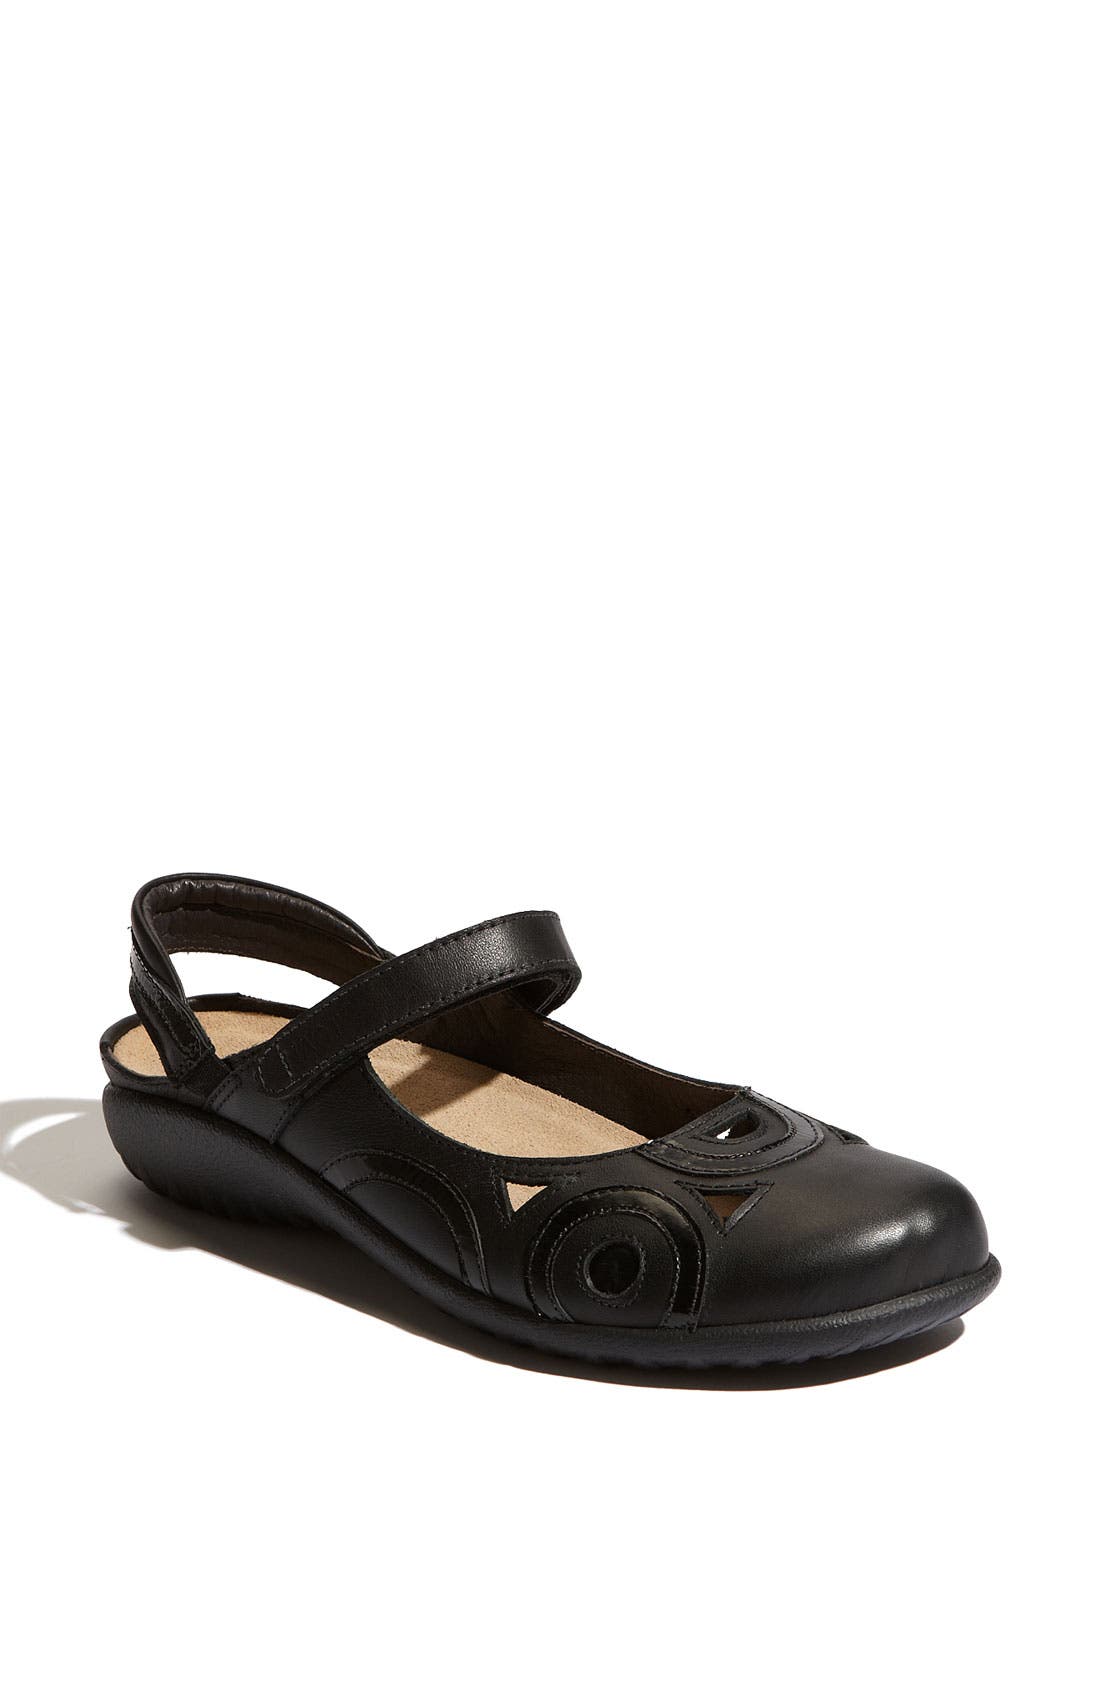 Naot 'rongo' Slip-on In Jet Black Leather